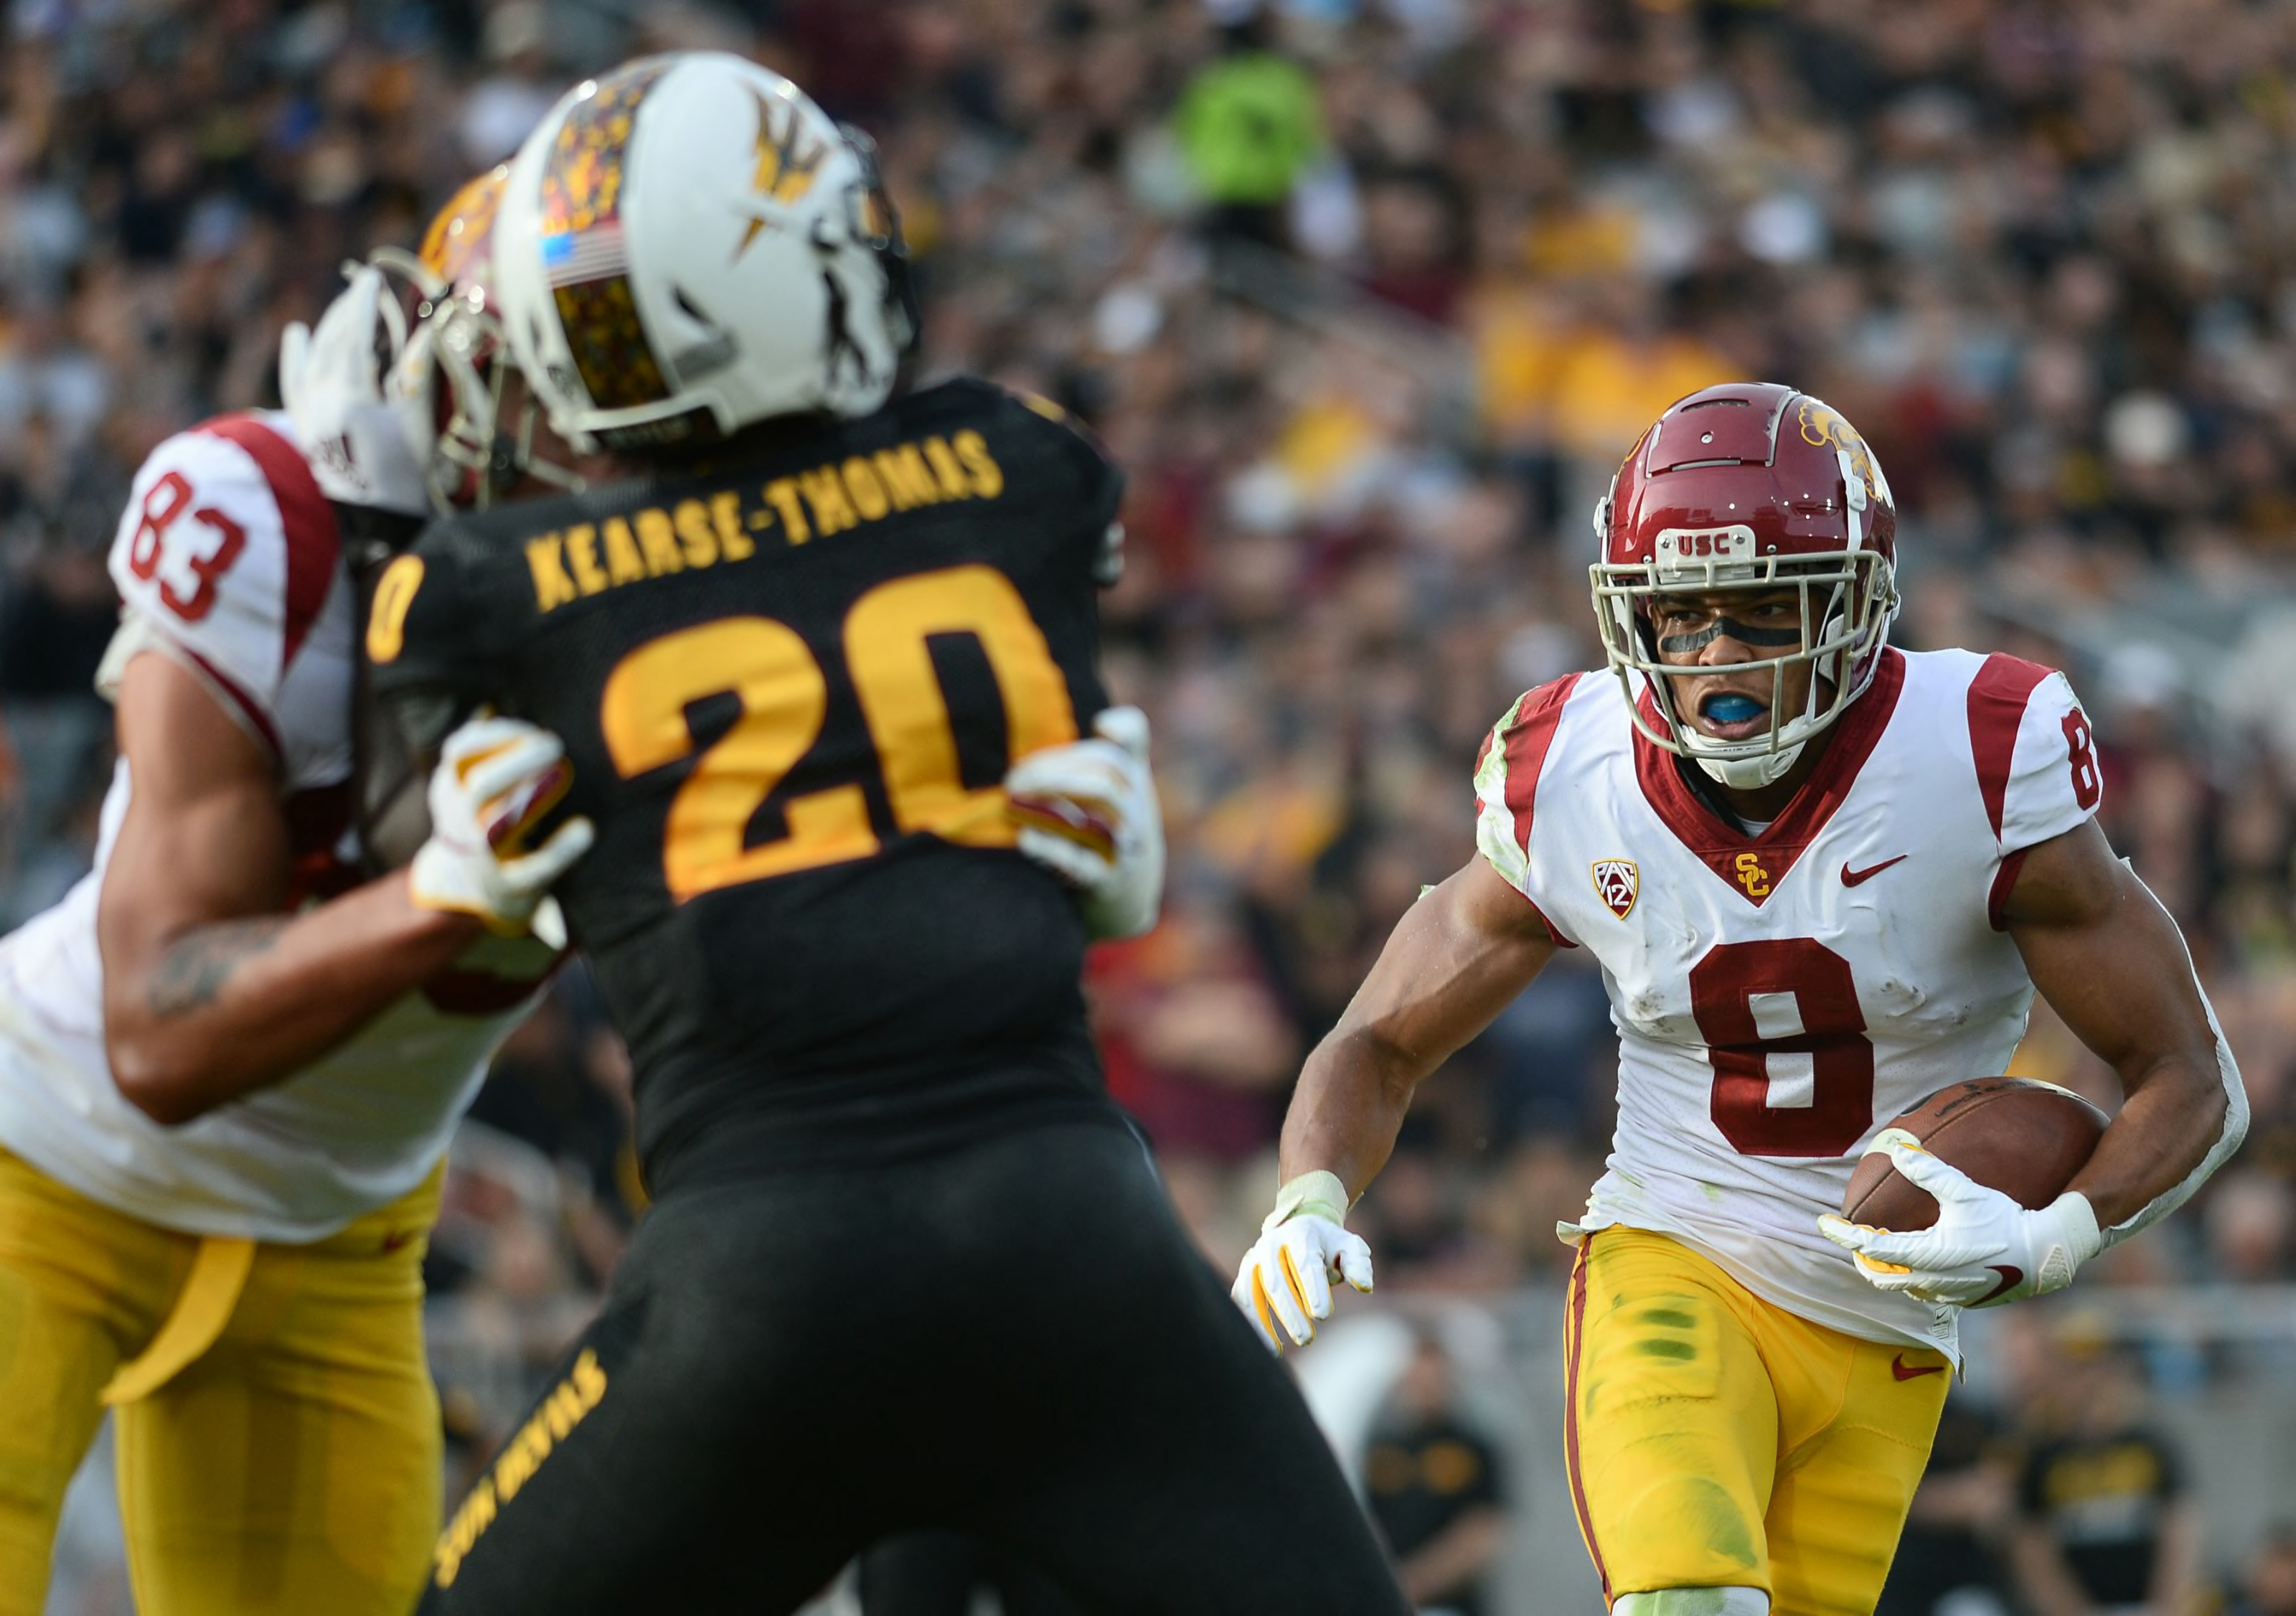 Usc Football Schedule 2020 : Ucla Football Could Benefit From Easier Nonconference Schedule In